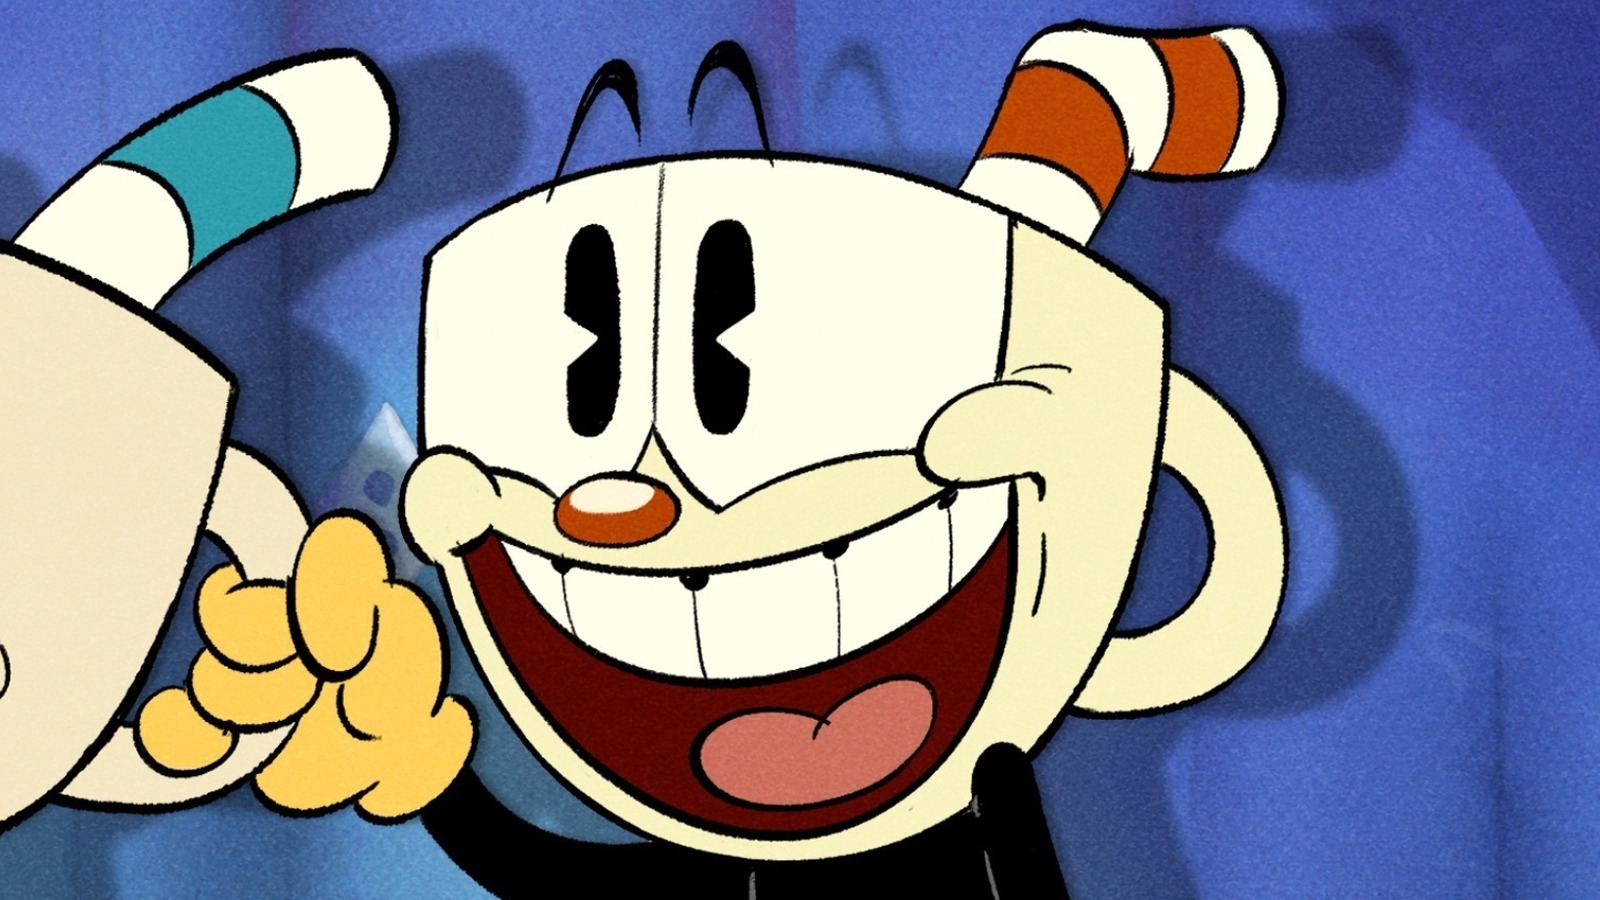 Cuphead and King Dice  Cartoon shows, Iconic characters, Deal with the  devil